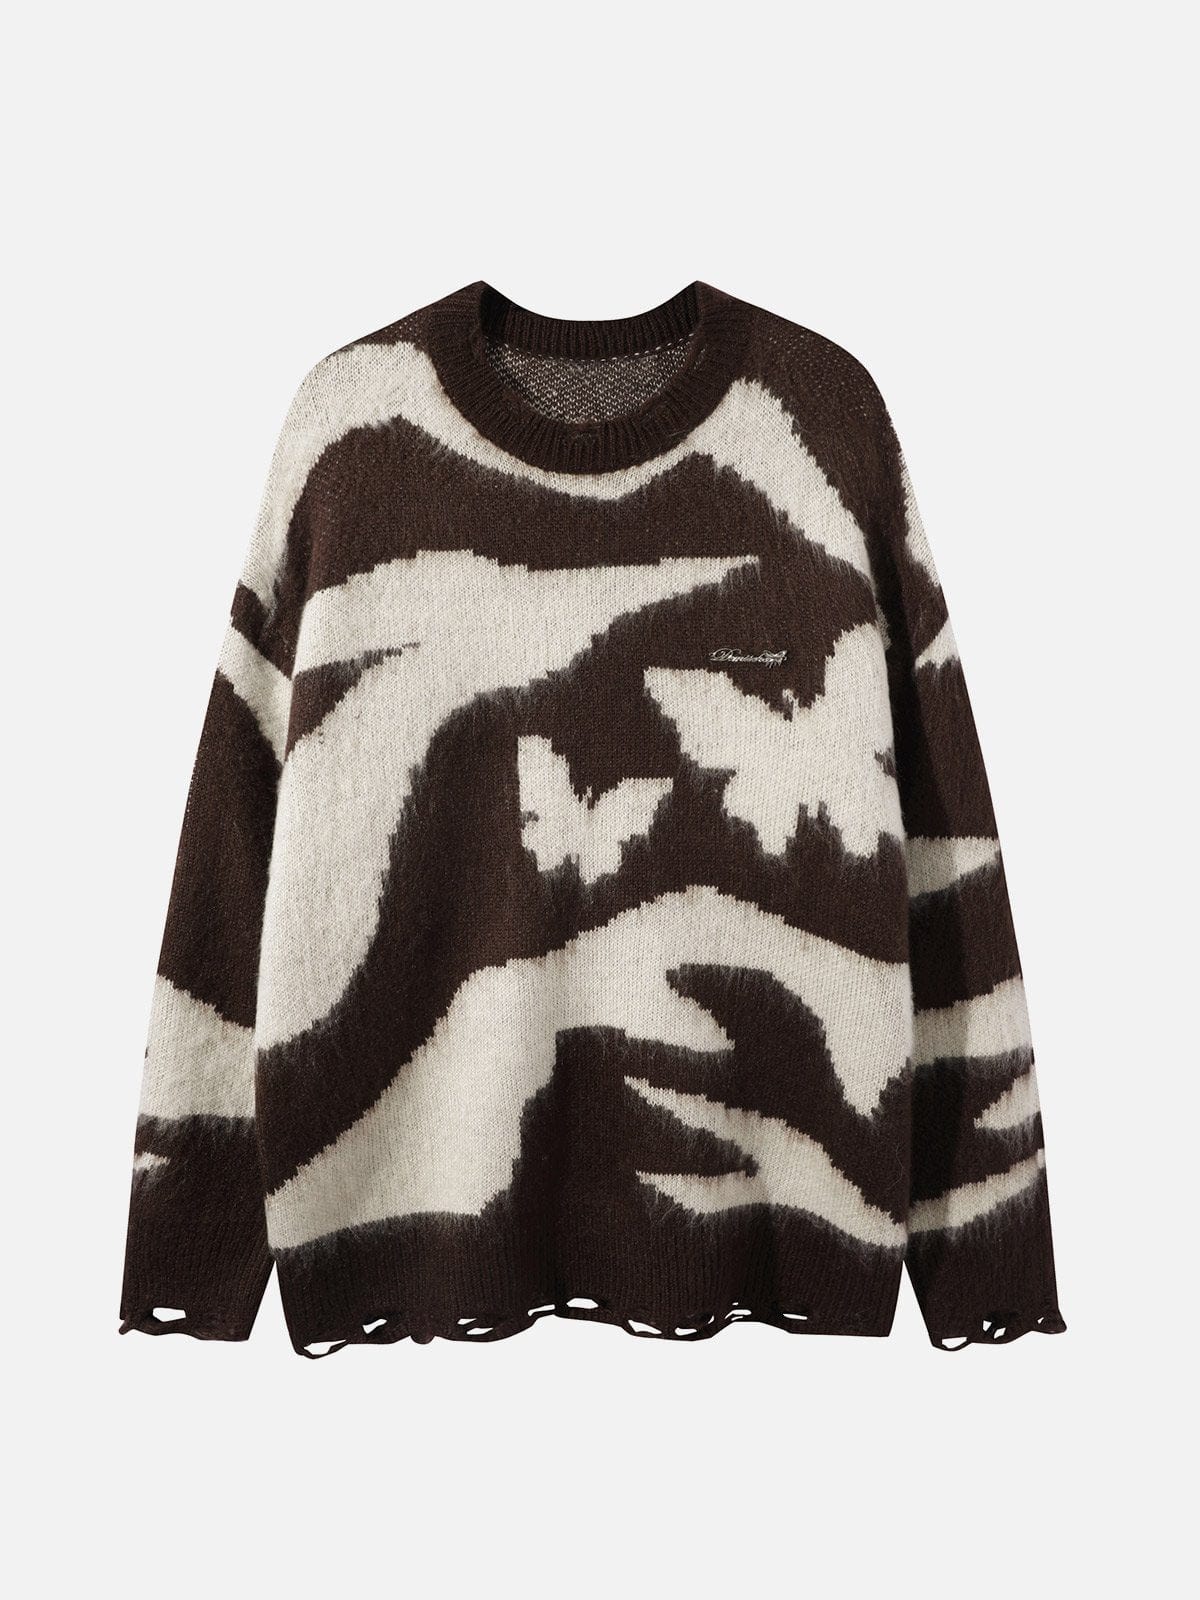 NEV Butterfly Jacquard Mohair Sweater